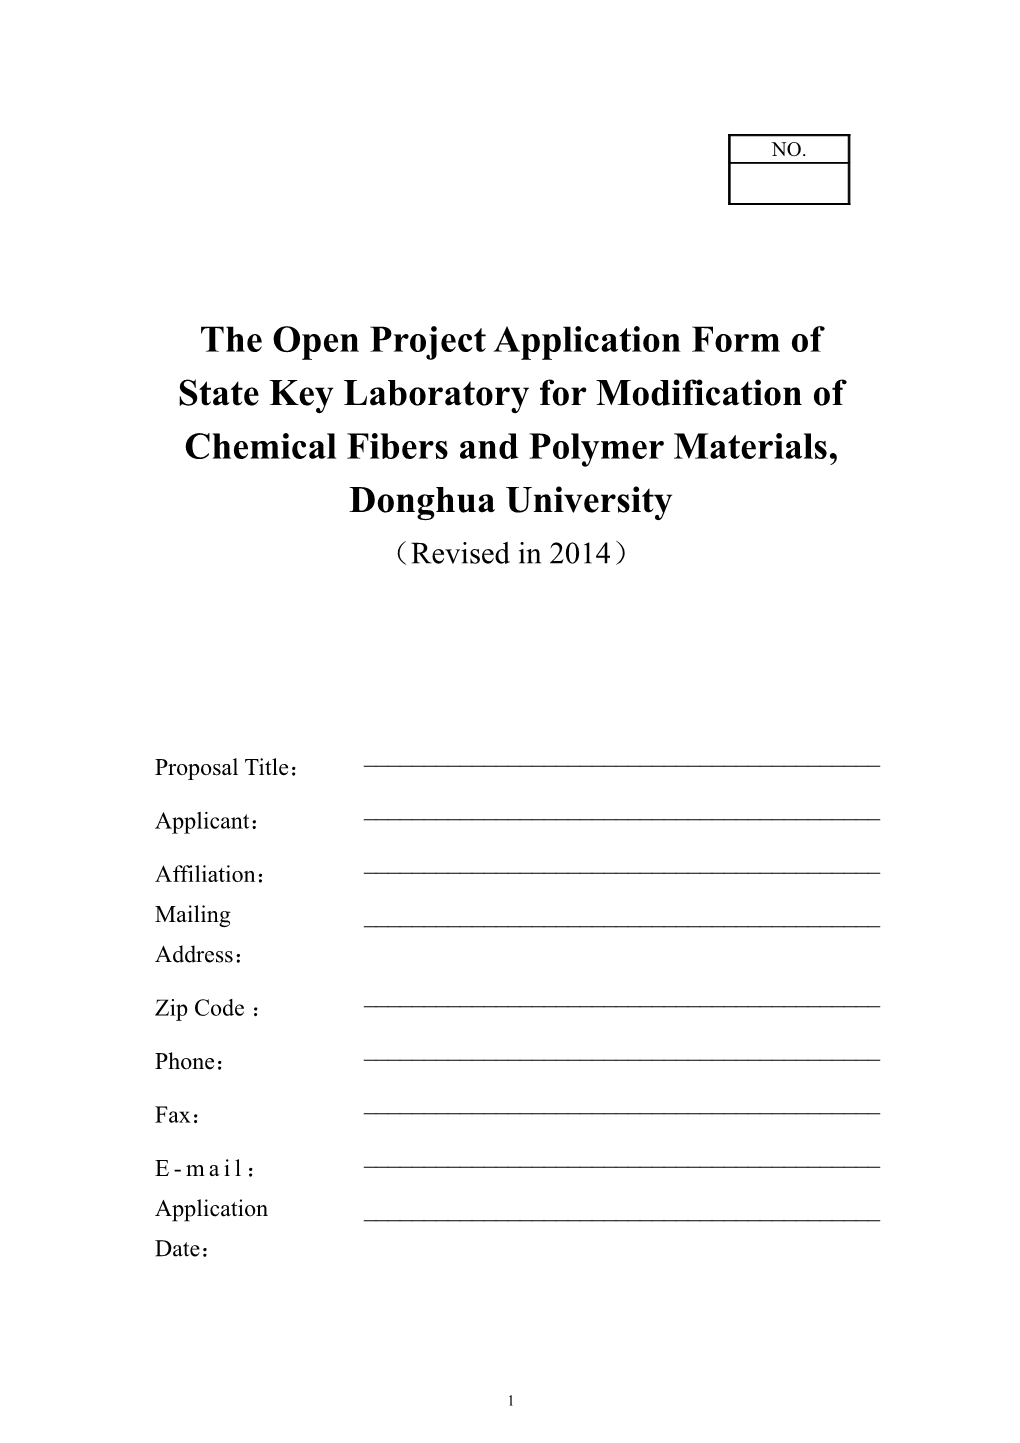 Theopen Project Application Form of State Key Laboratory for Modification of Chemical